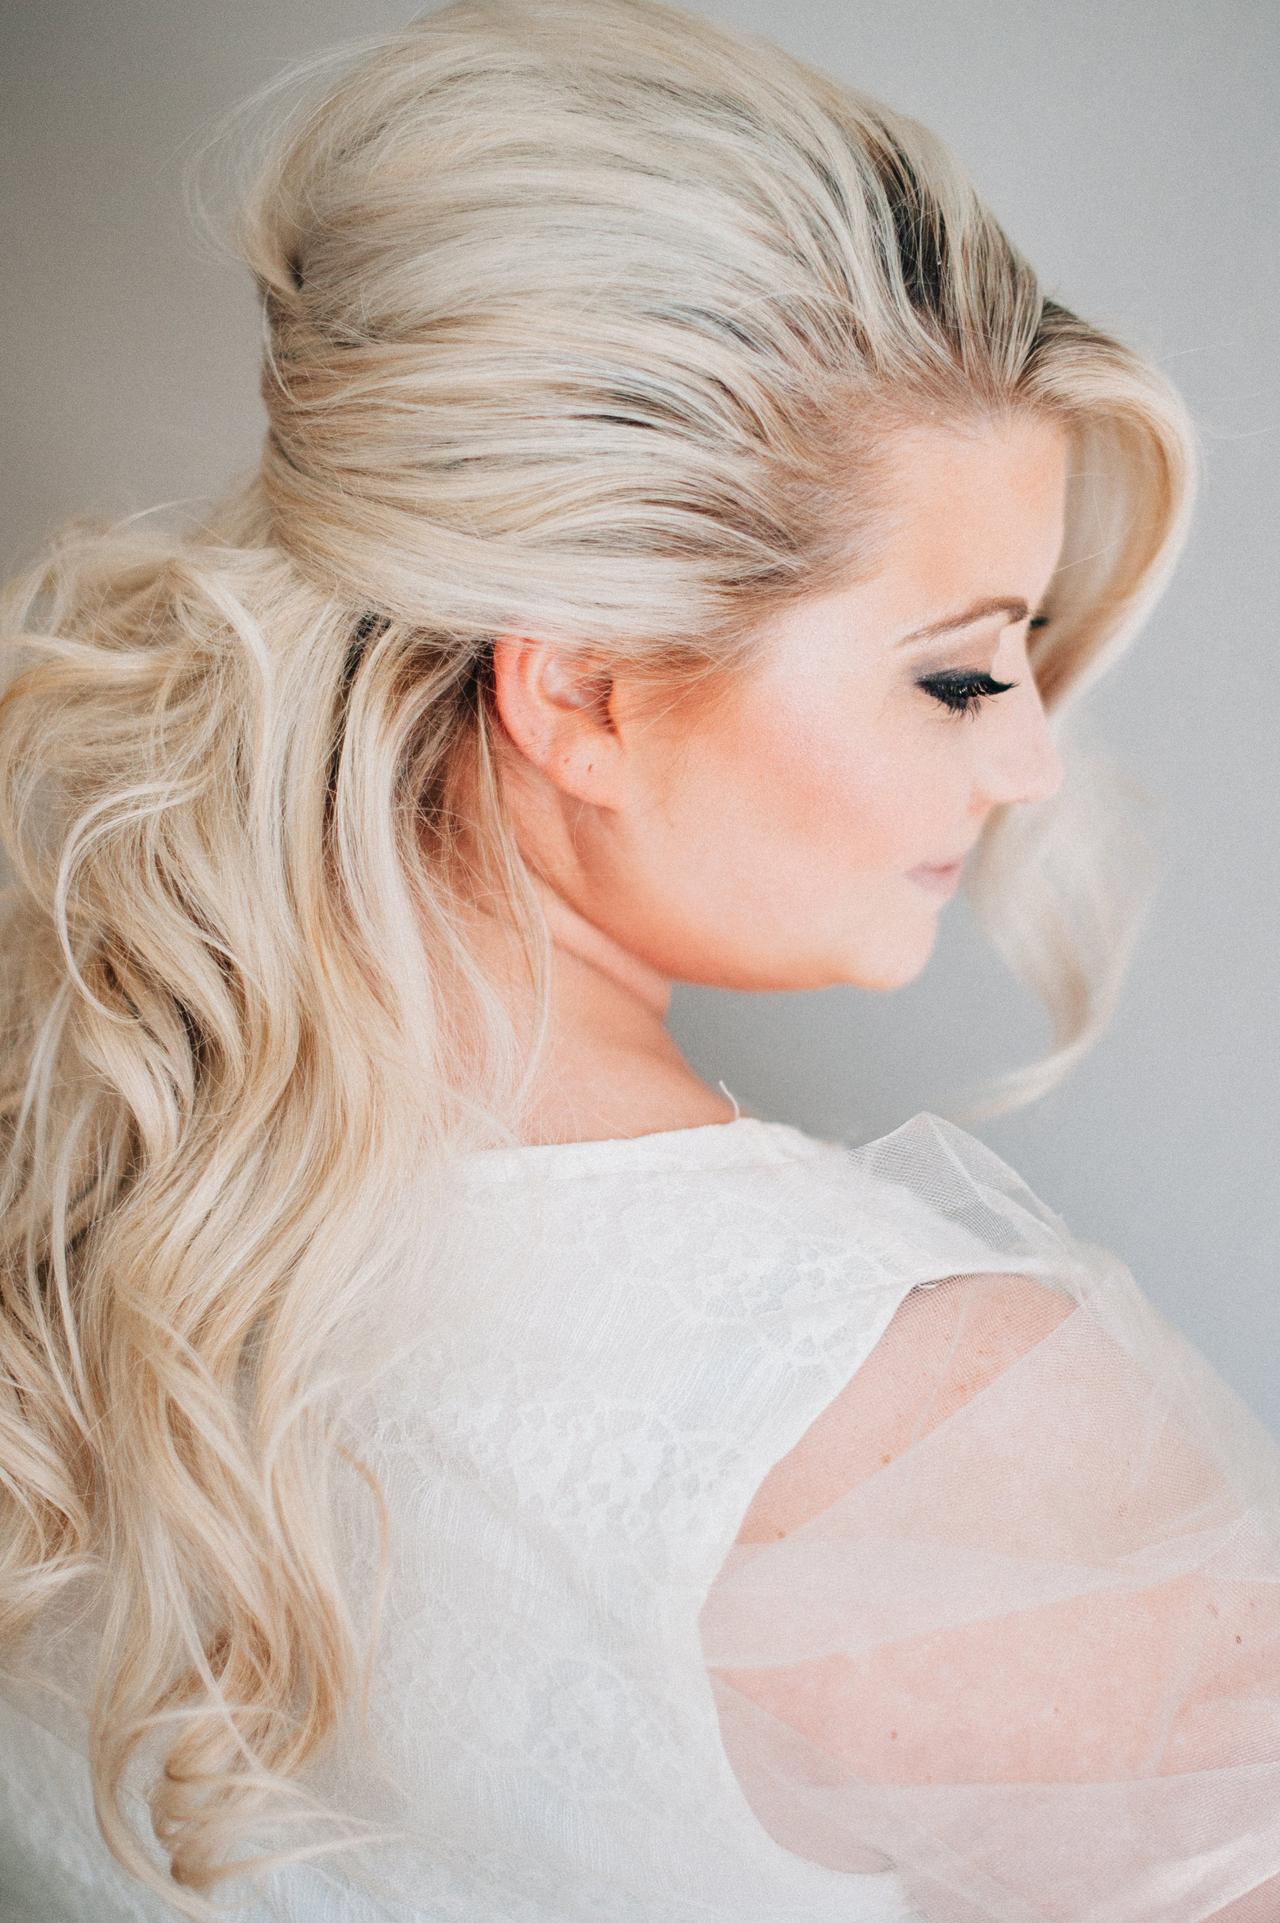 3 Easy Summer Hairstyles for Hot Days | Sunday Salon